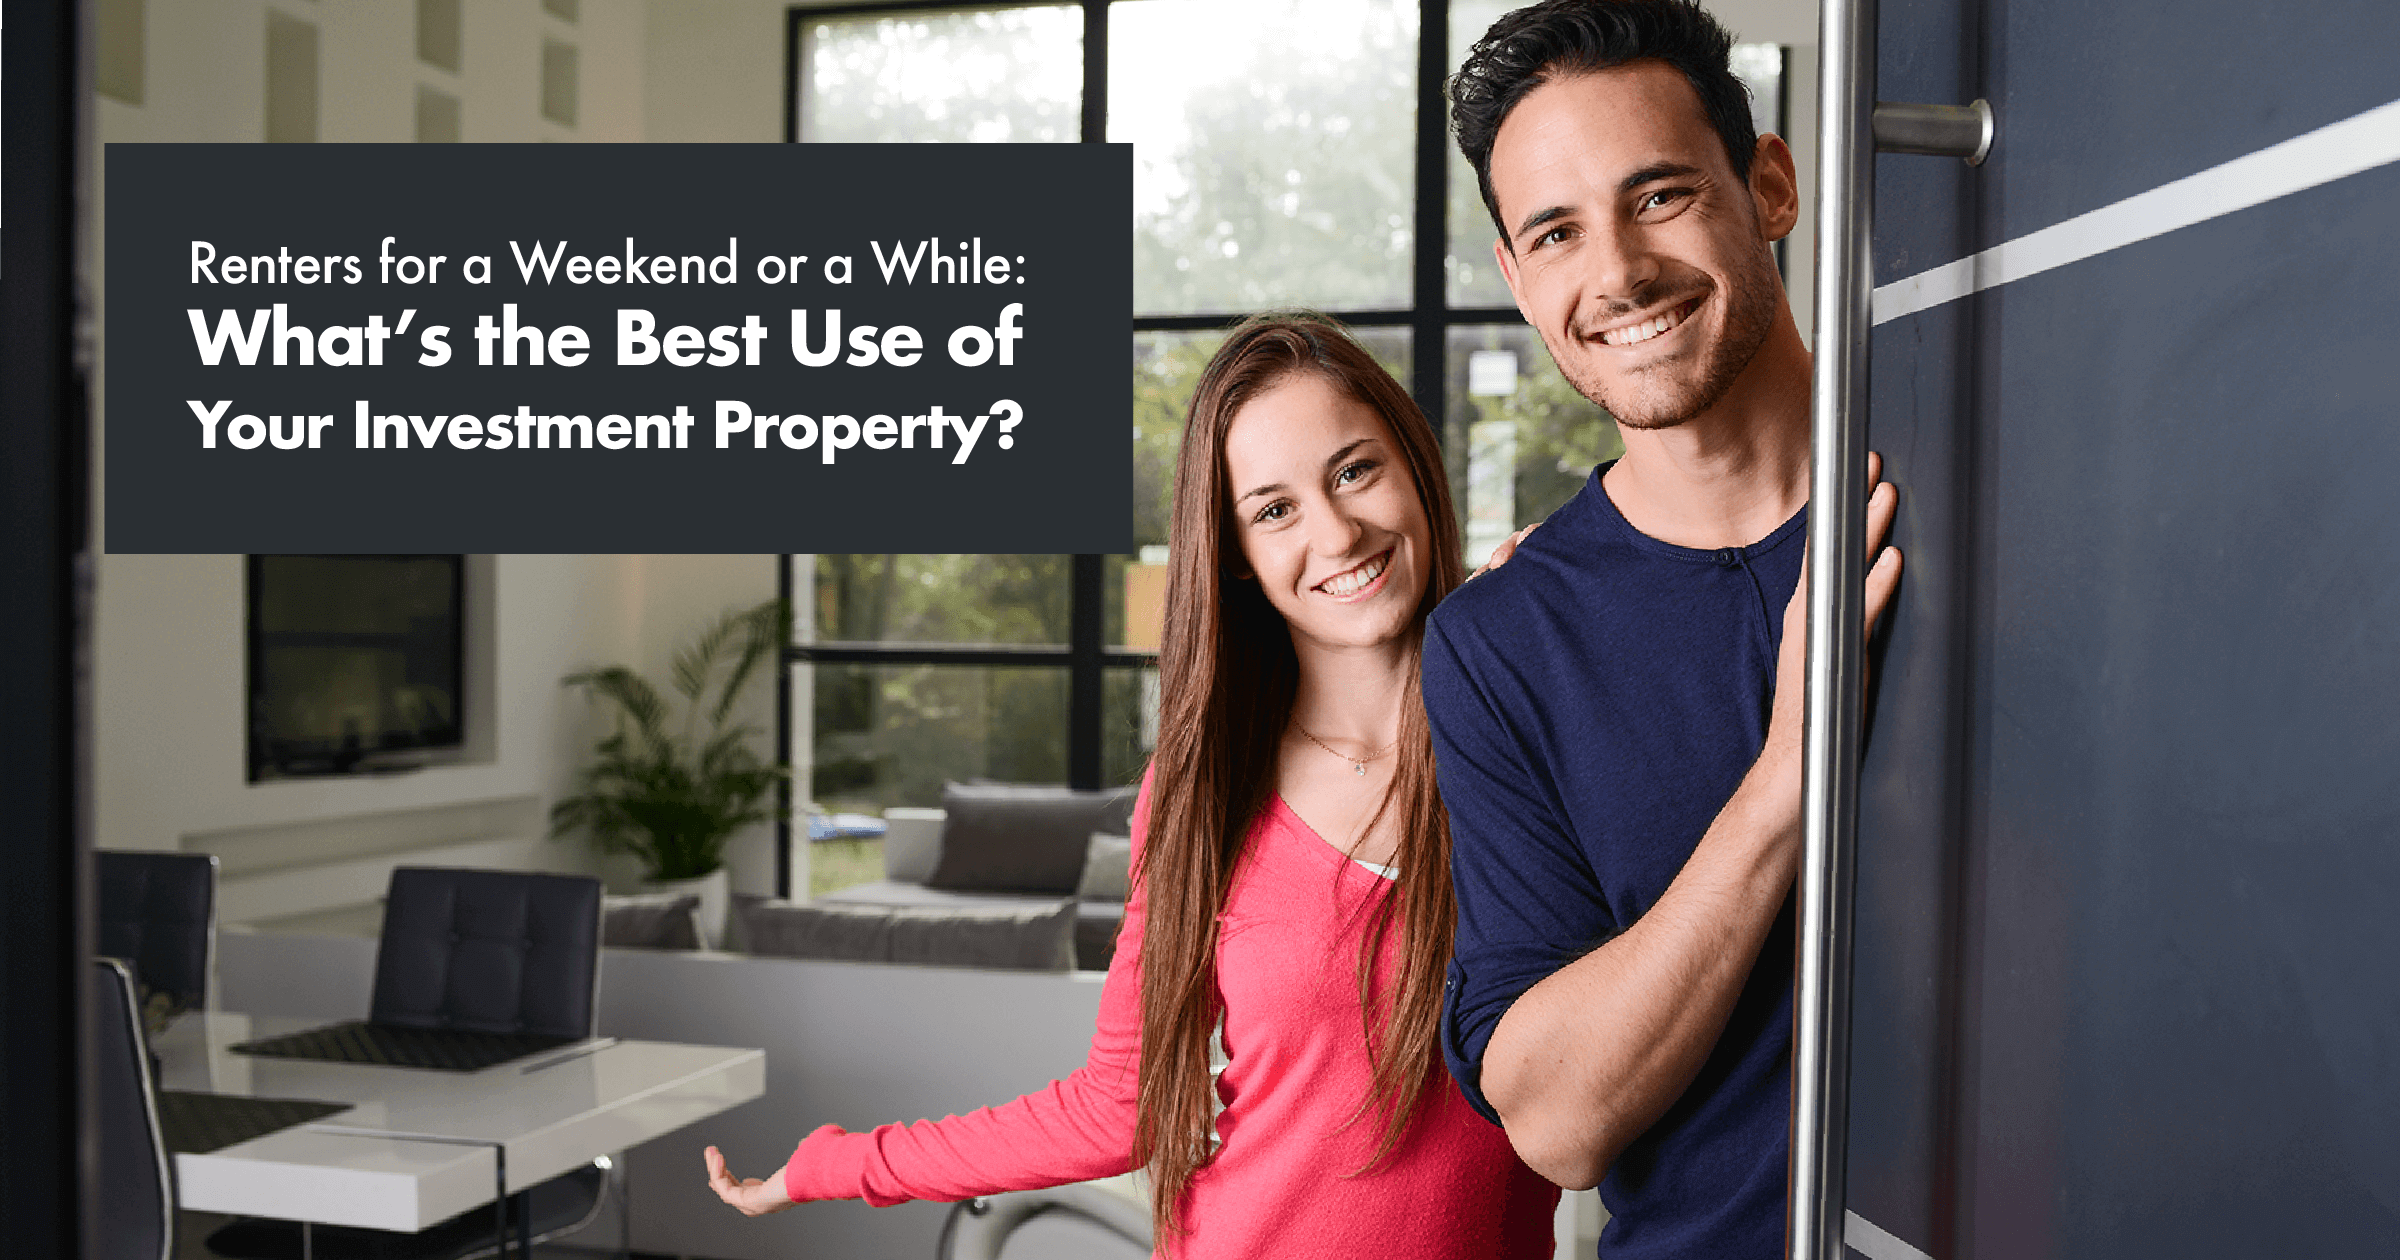 What's the best use of your investment property